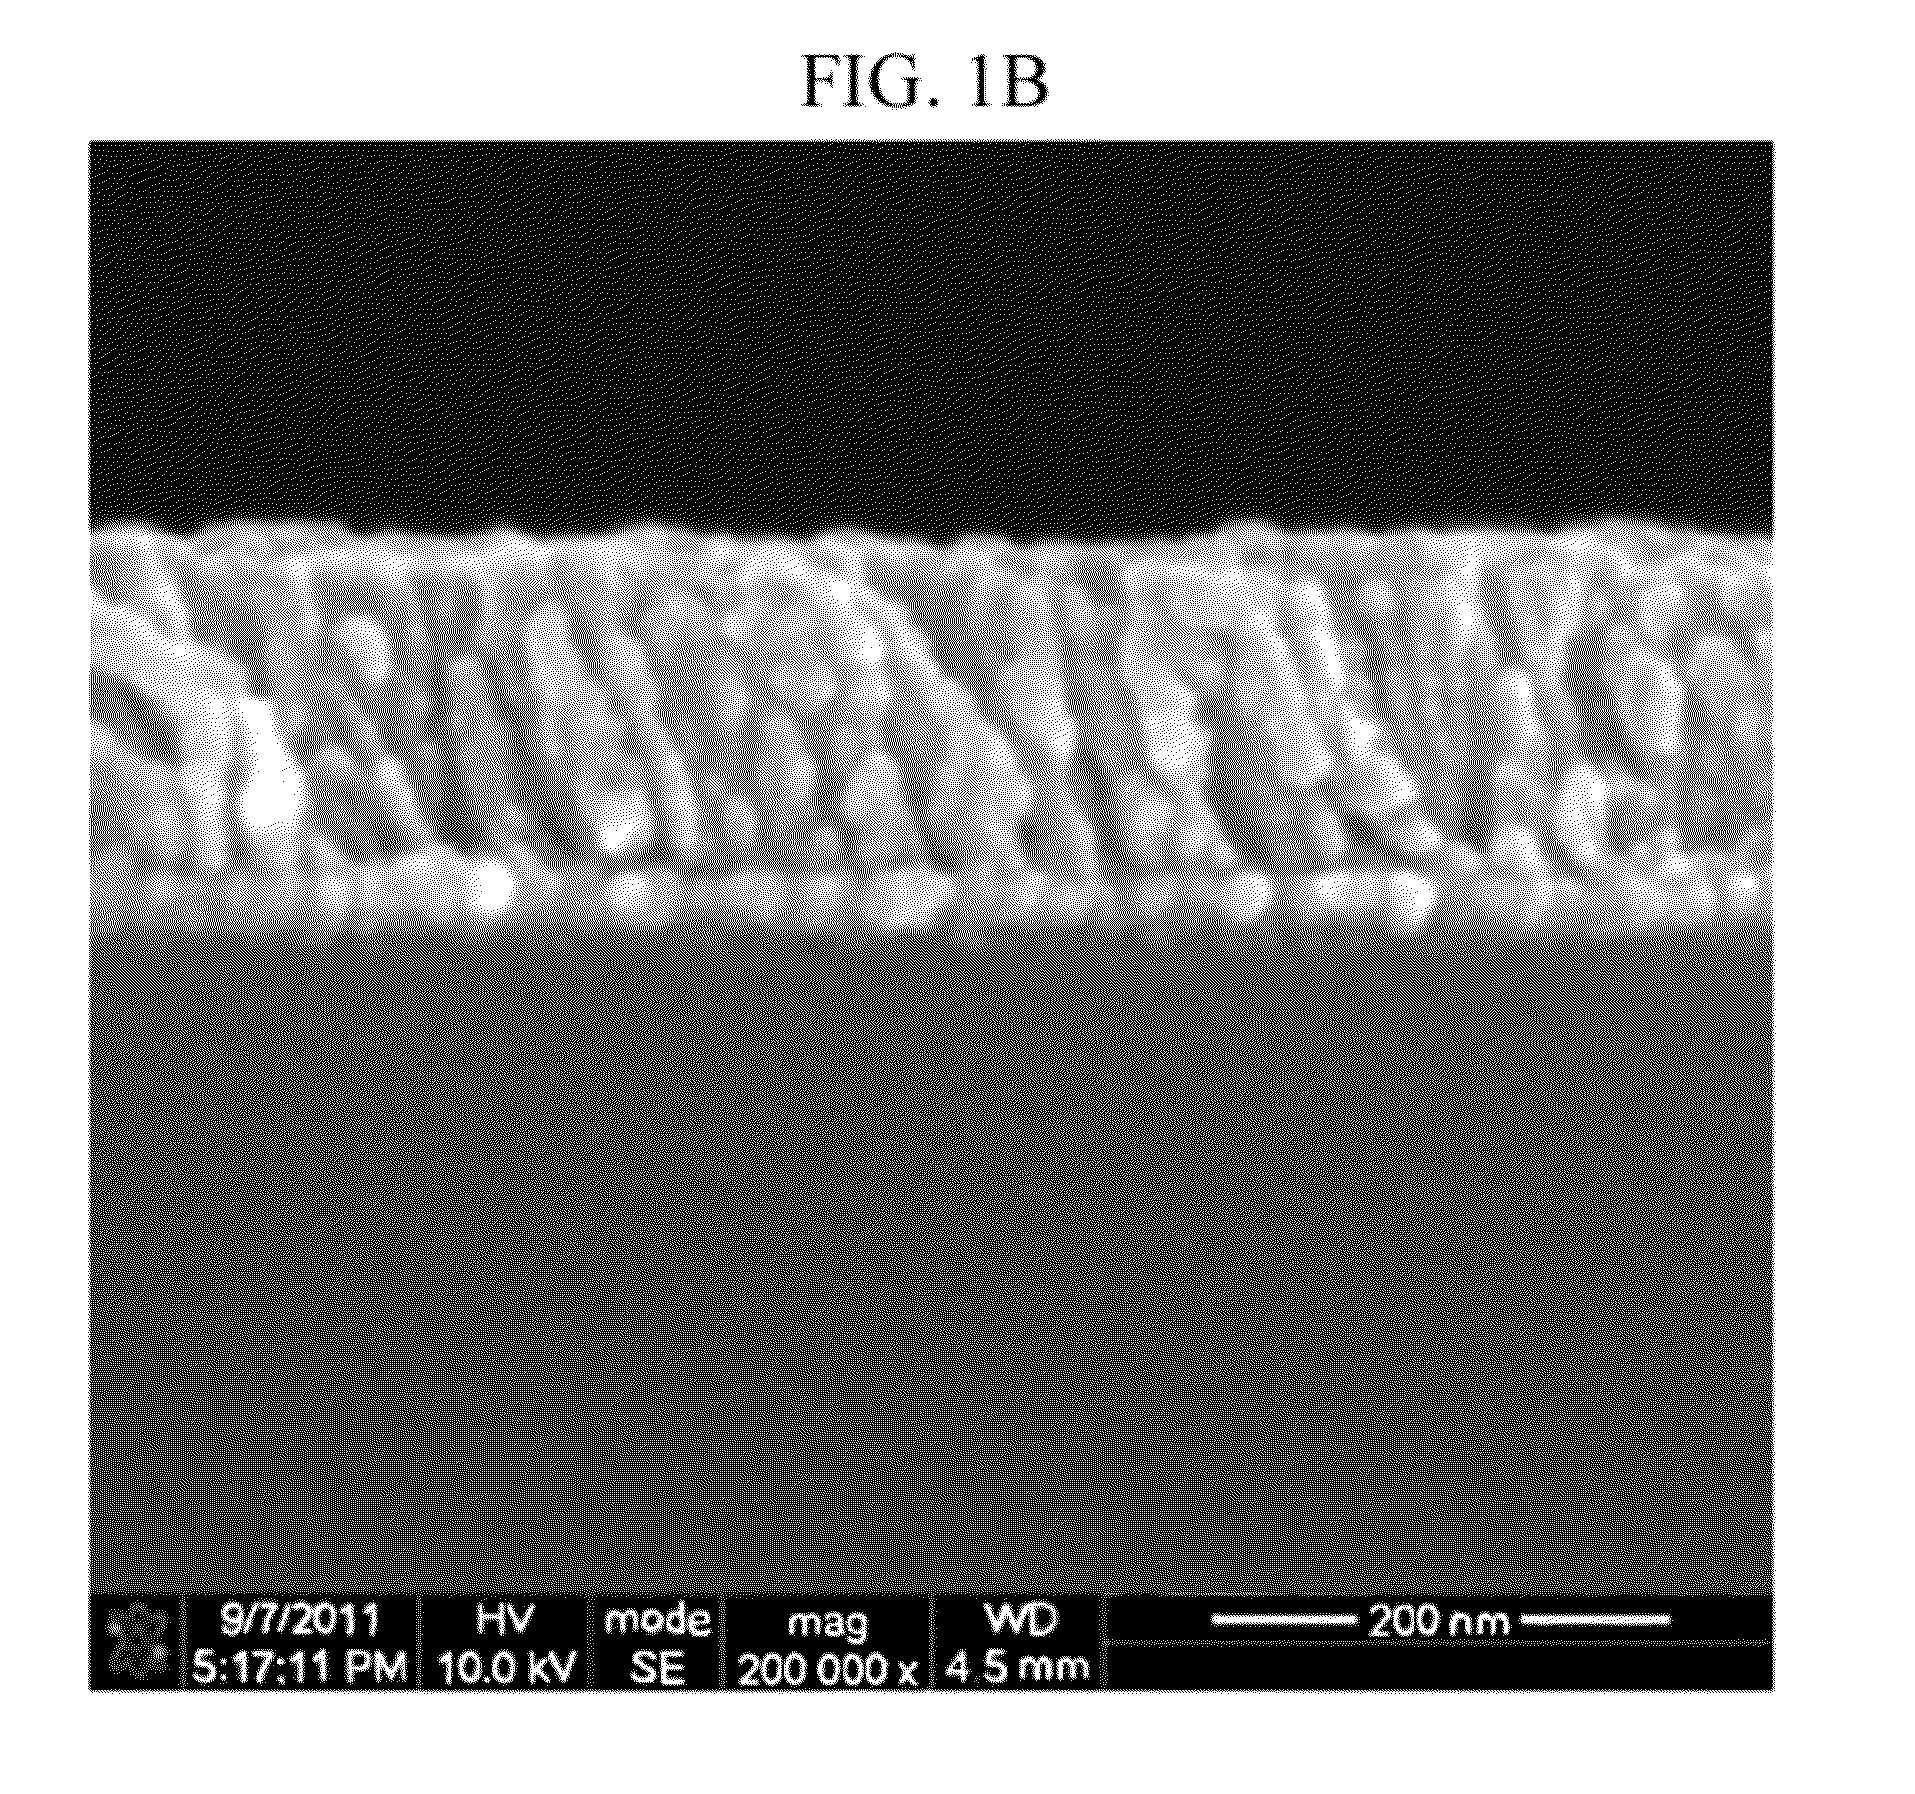 Method of fabricating porous film structure using dry processes and porous film structures fabricated by the same